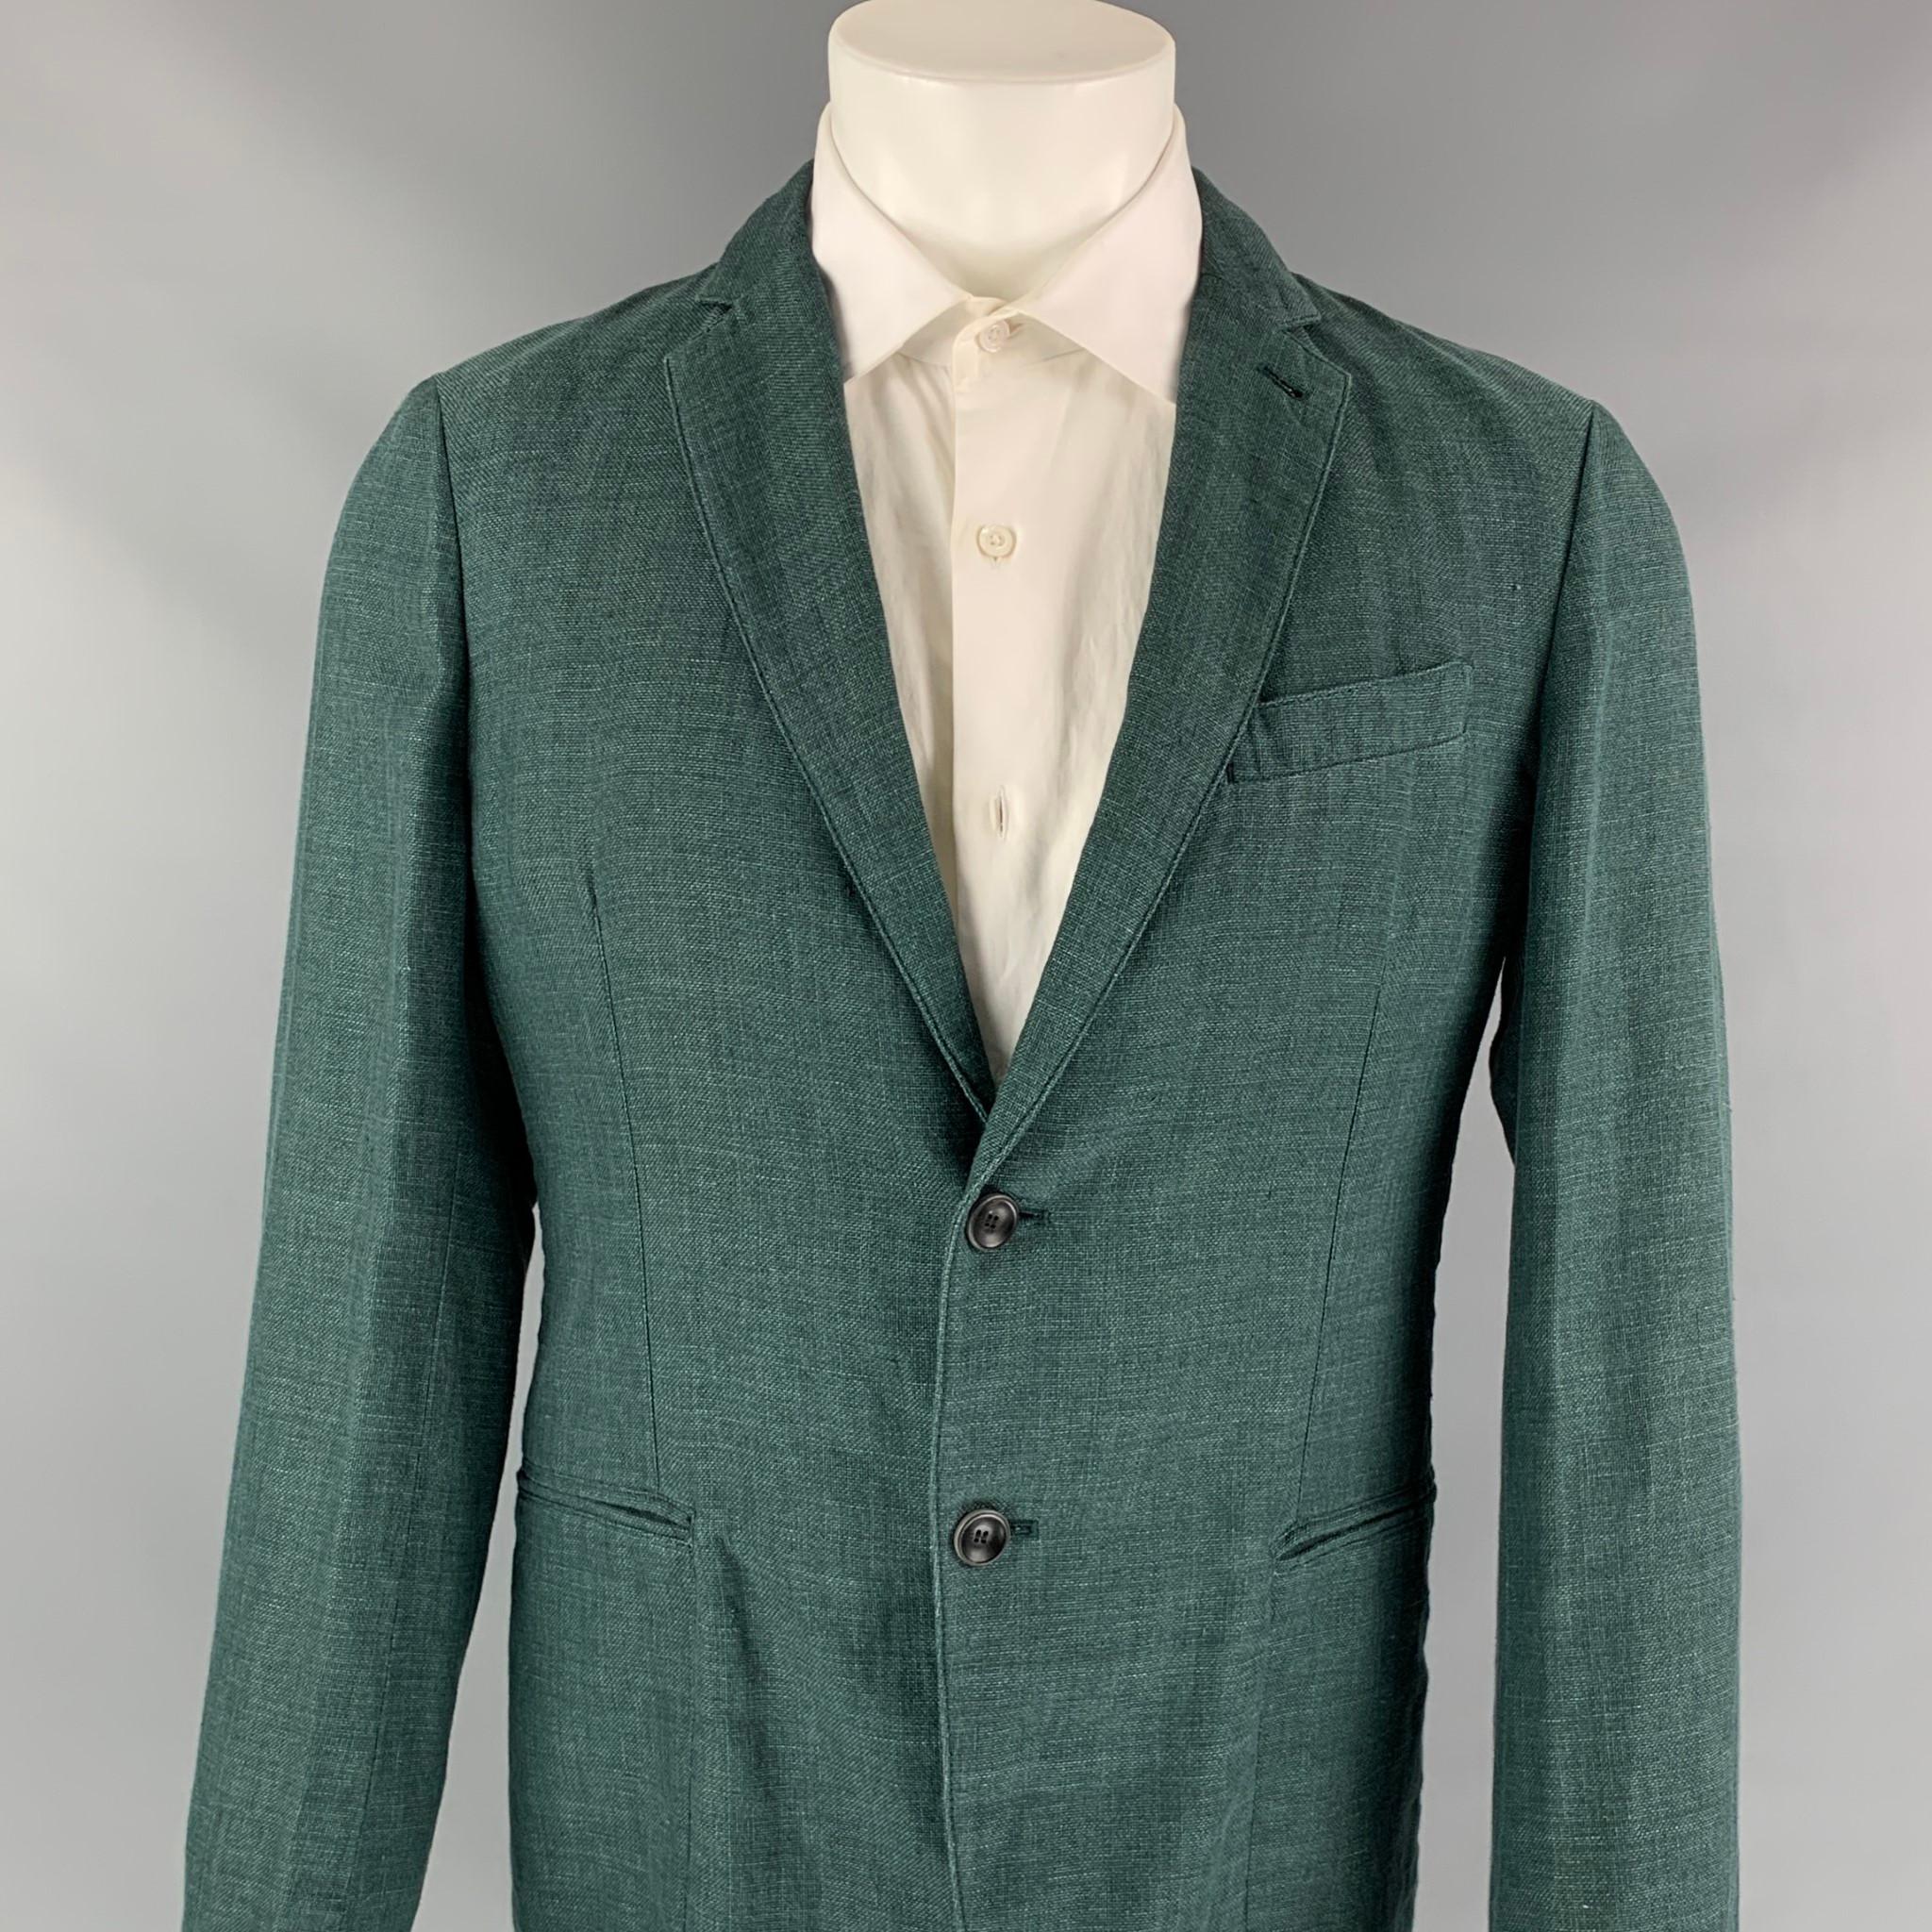 ARMANI COLLEZIONI sport coat comes in a green cotton / linen featuring a notch lapel, slit pockets, and a two button closure. 

New With Tags. 
Marked: 50

Measurements:

Shoulder: 16.5 in.
Chest: 40 in.
Sleeve: 26 in.
Length: 28 in. 